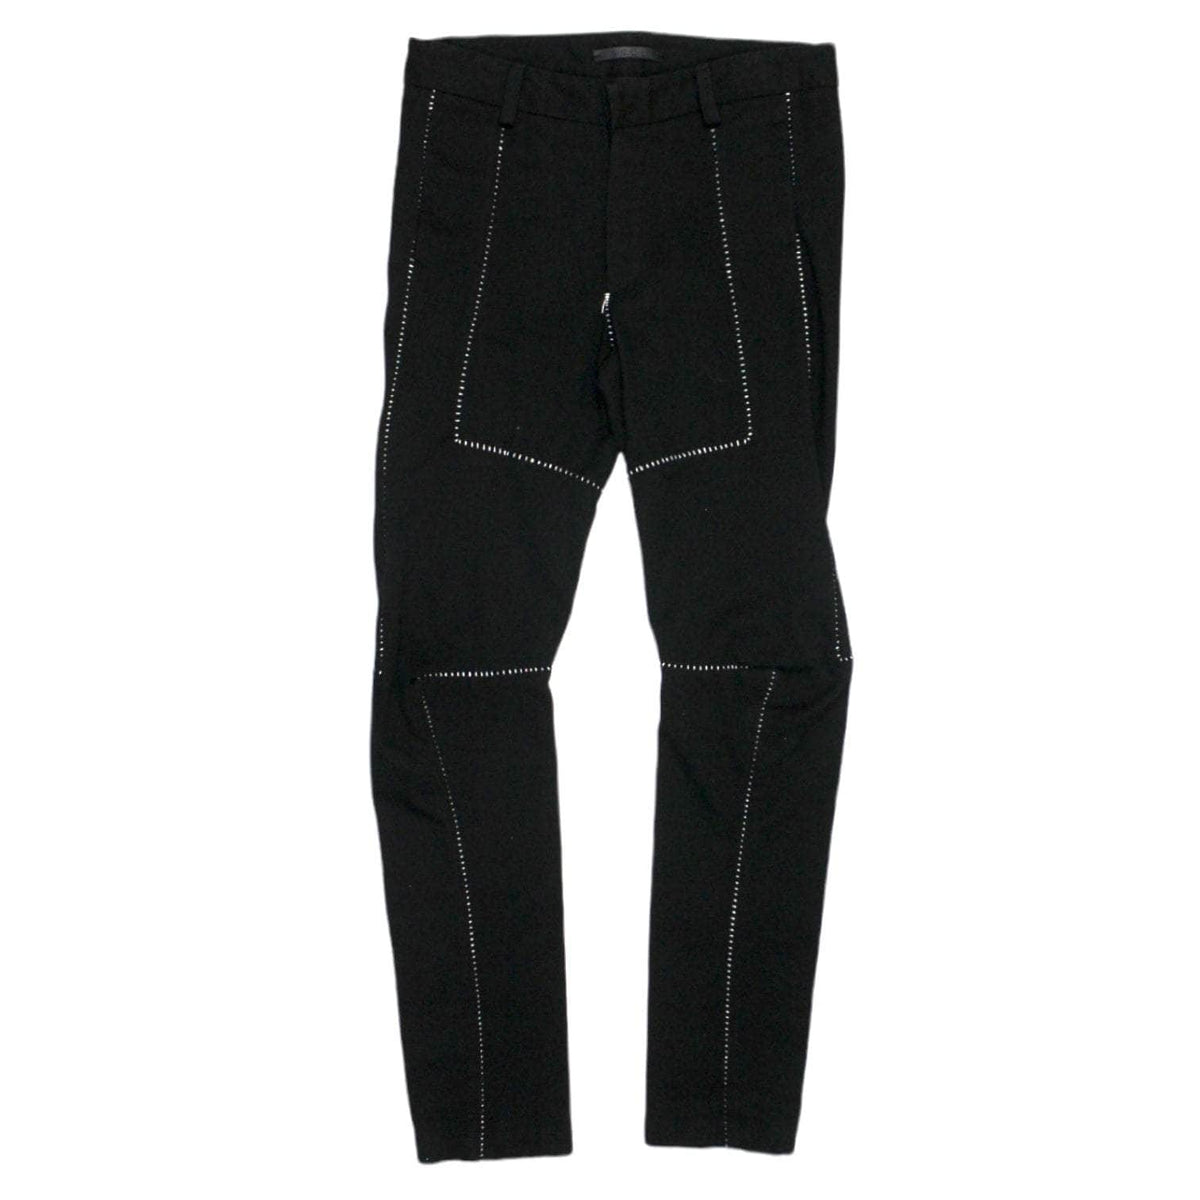 Obscur Black with White Stitch Design Cotton Twill Trousers